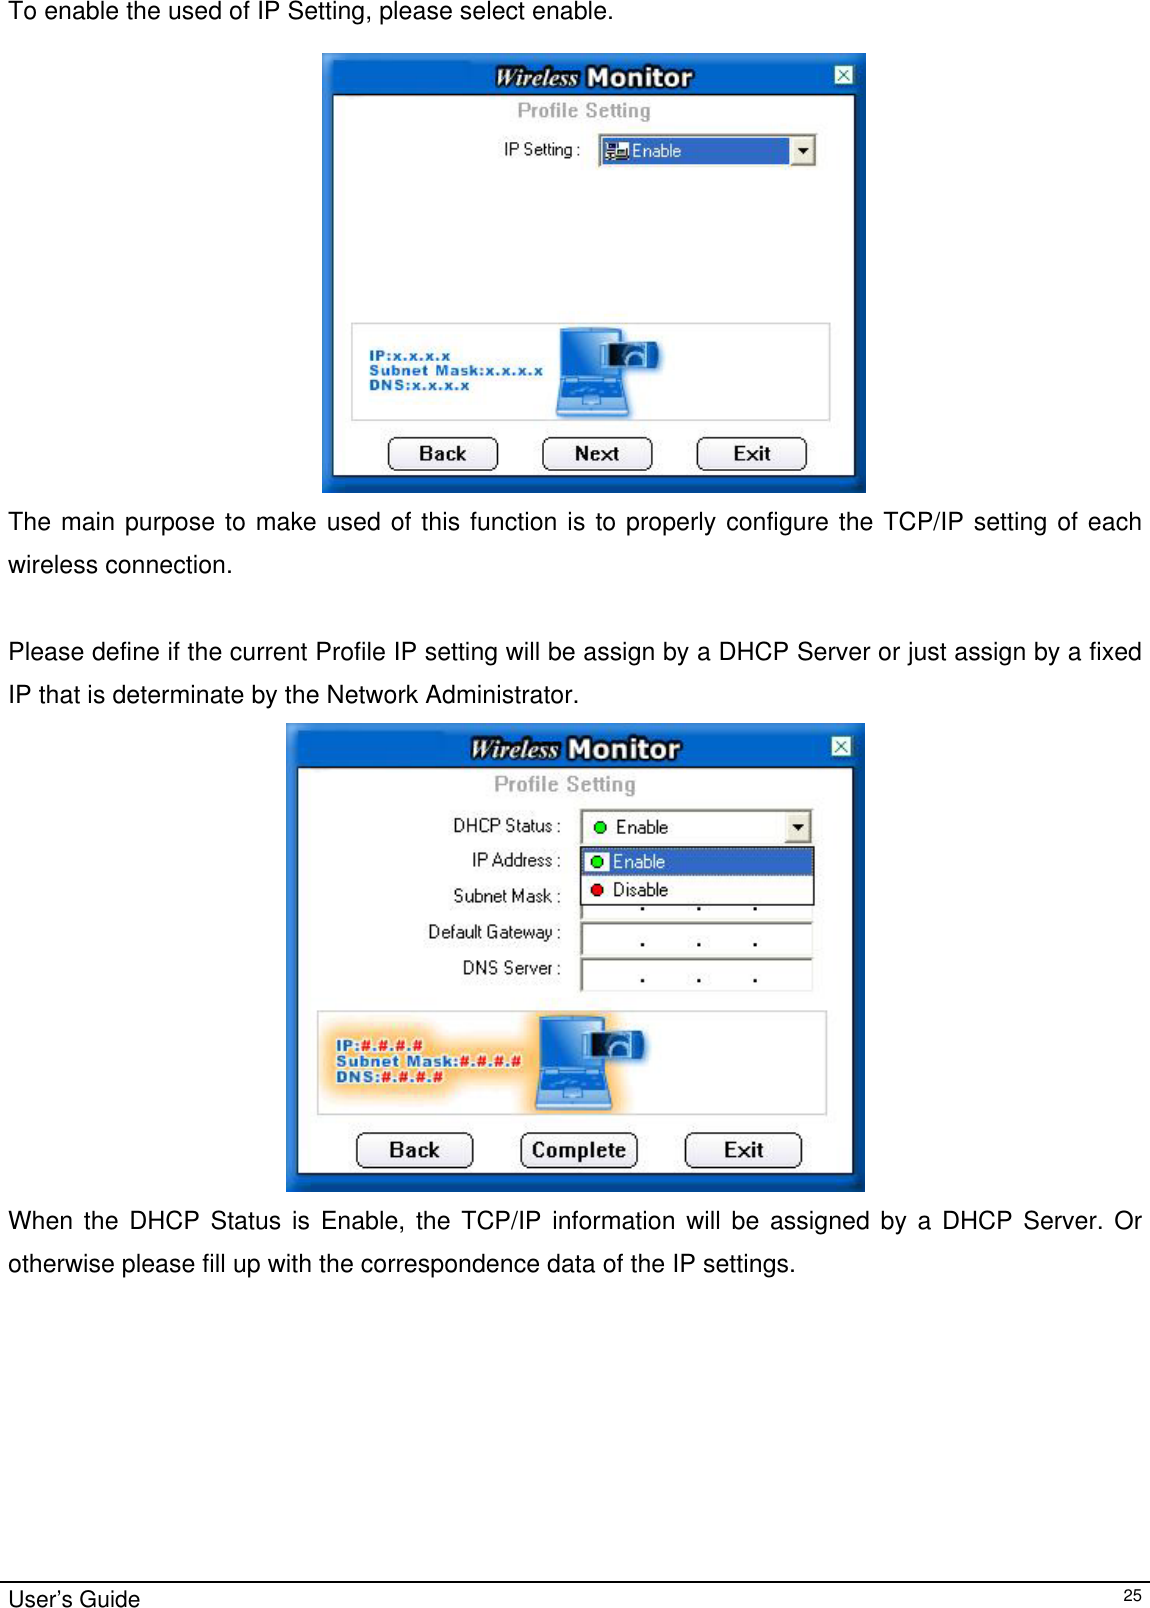                                                                                                                                                                                                                                         To enable the used of IP Setting, please select enable.    The main purpose to make used of this function is to properly configure the TCP/IP setting of each wireless connection.   Please define if the current Profile IP setting will be assign by a DHCP Server or just assign by a fixed IP that is determinate by the Network Administrator.  When the DHCP Status is Enable, the TCP/IP information will be assigned by a DHCP Server. Or otherwise please fill up with the correspondence data of the IP settings. User’s Guide   25